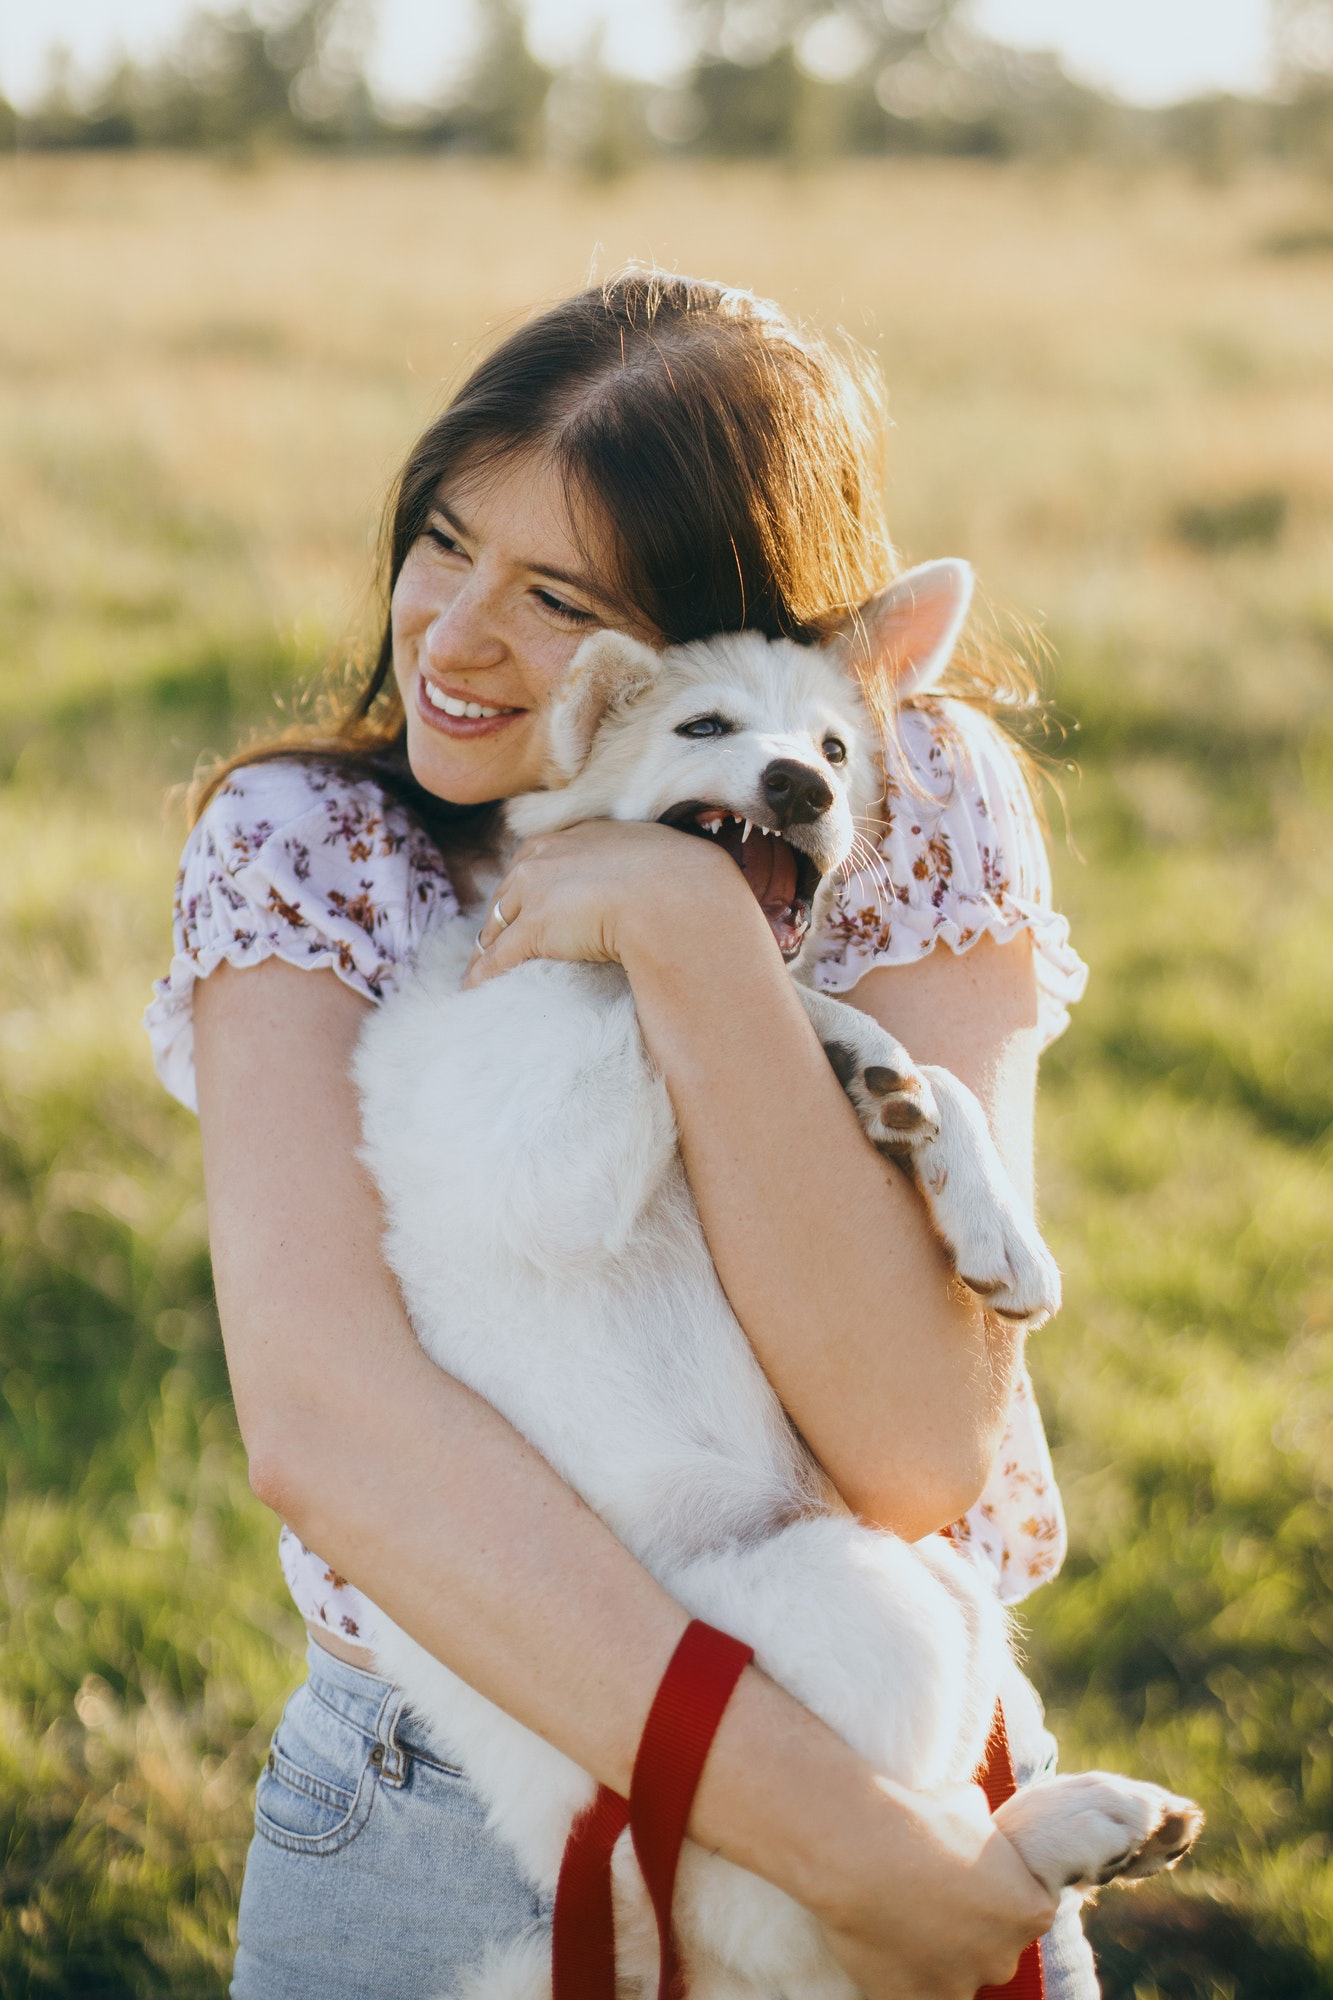 stylish-young-woman-hugging-cute-white-puppy-in-warm-sunset-light-in-summer-meadow.jpg